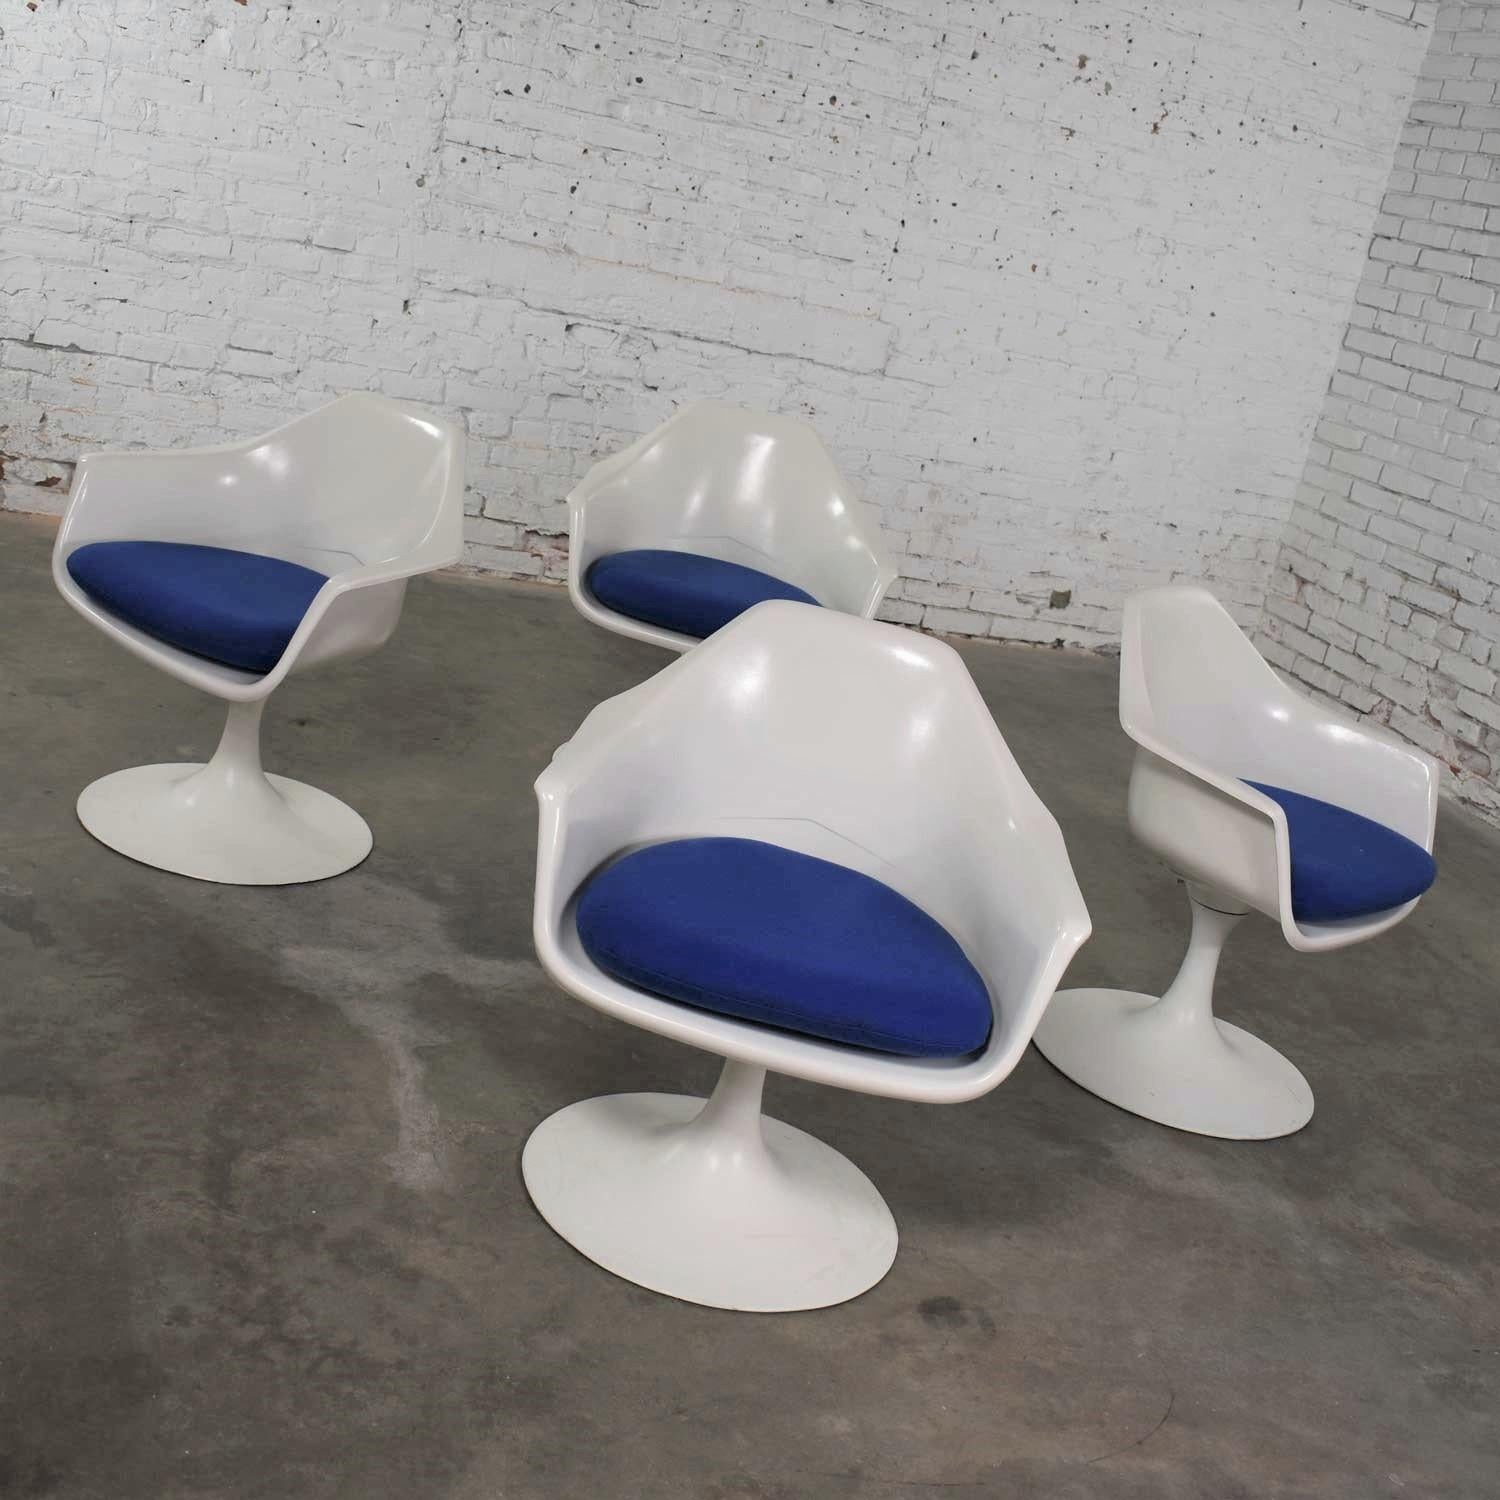 Handsome set of four tulip style white fiberglass swivel armchairs with royal blue seat cushions designed by Arthur Umanoff for Contemporary Shells. These are era appropriate vintage chairs done in the style of Eero Saarinen for Knoll. They are in